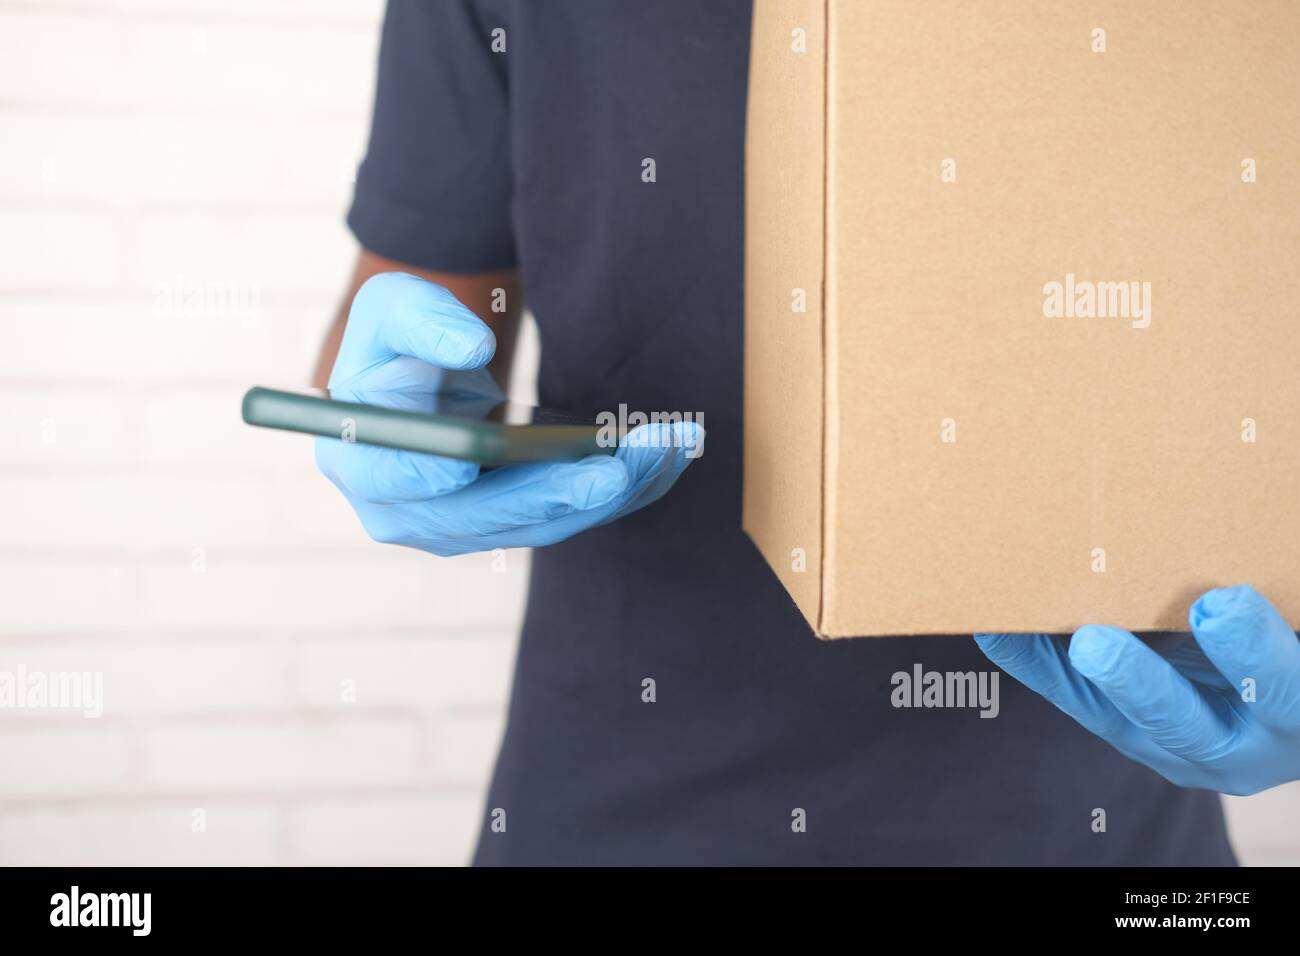 https://c8.alamy.com/comp/2F1F9CE/delivery-man-hand-in-latex-gloves-holding-smart-phone-and-card-box-2F1F9CE.jpg